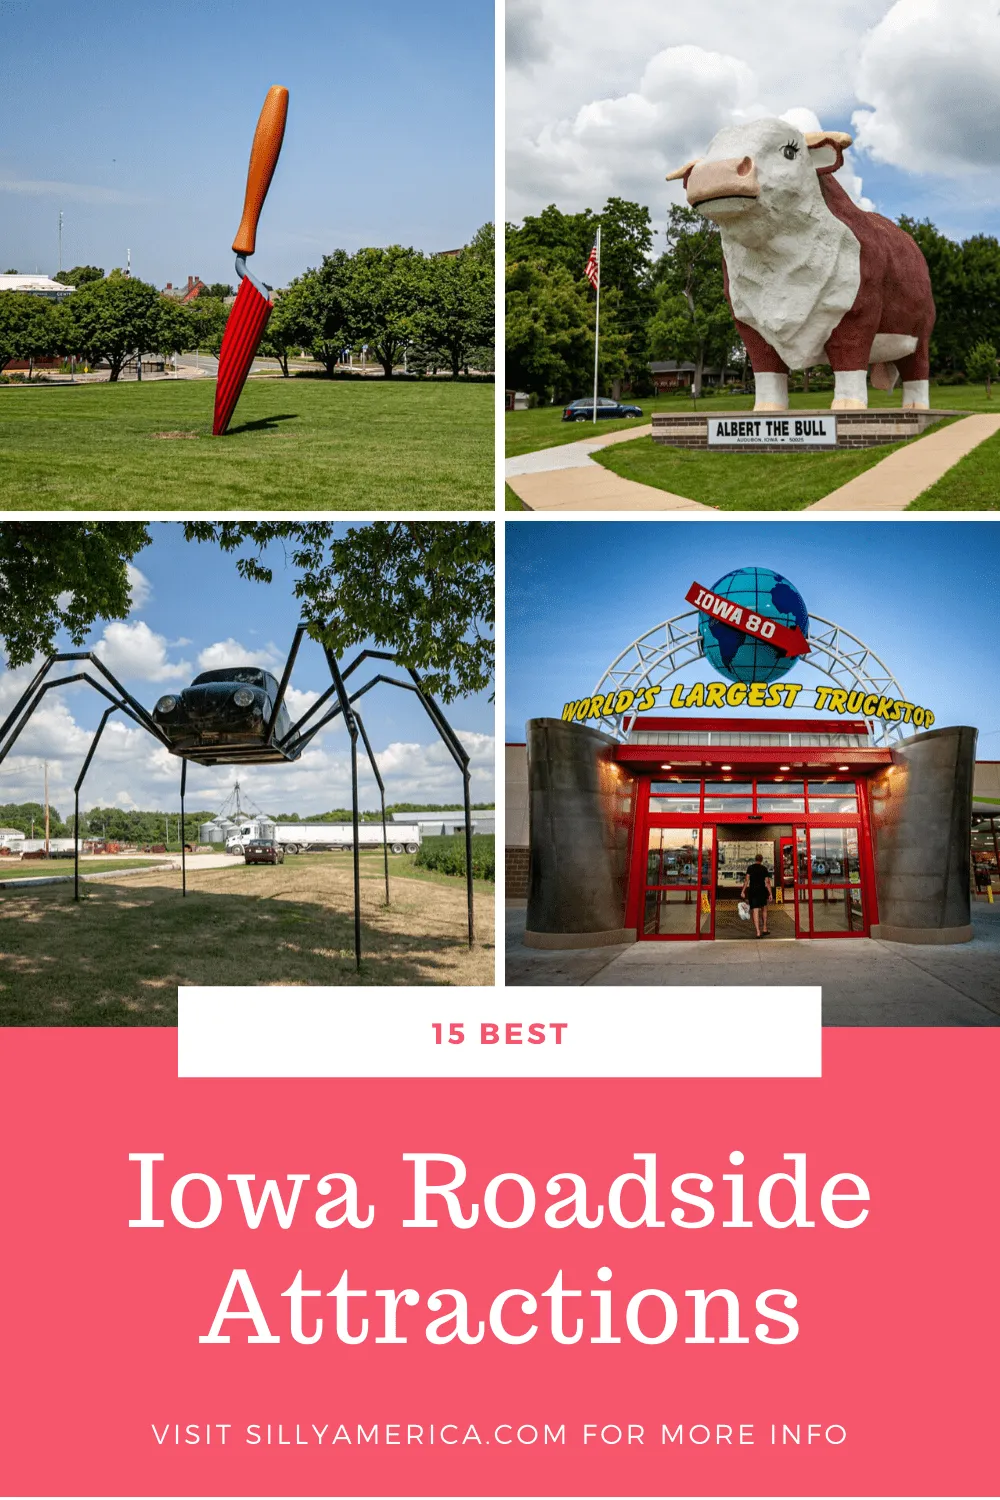 The best Iowa roadside attractions to visit on an Iowa road trip or weekend getaway. Add these roadside oddities and road trip stops to your bucket list and visit these roadside attractions in Iowa on your next travel adventure. #IowaRoadsideAttractions #IowaRoadsideAttraction #RoadsideAttractions #RoadsideAttraction #RoadTrip #IowaRoadTrip #IowaThingsToDo #IowaRoadTripBucketLists #IowaBucketList #IowaRoadTripIdeas #IowaWaterfallsRoadTrip #IowaTravel #WeirdRoadsideAttractions